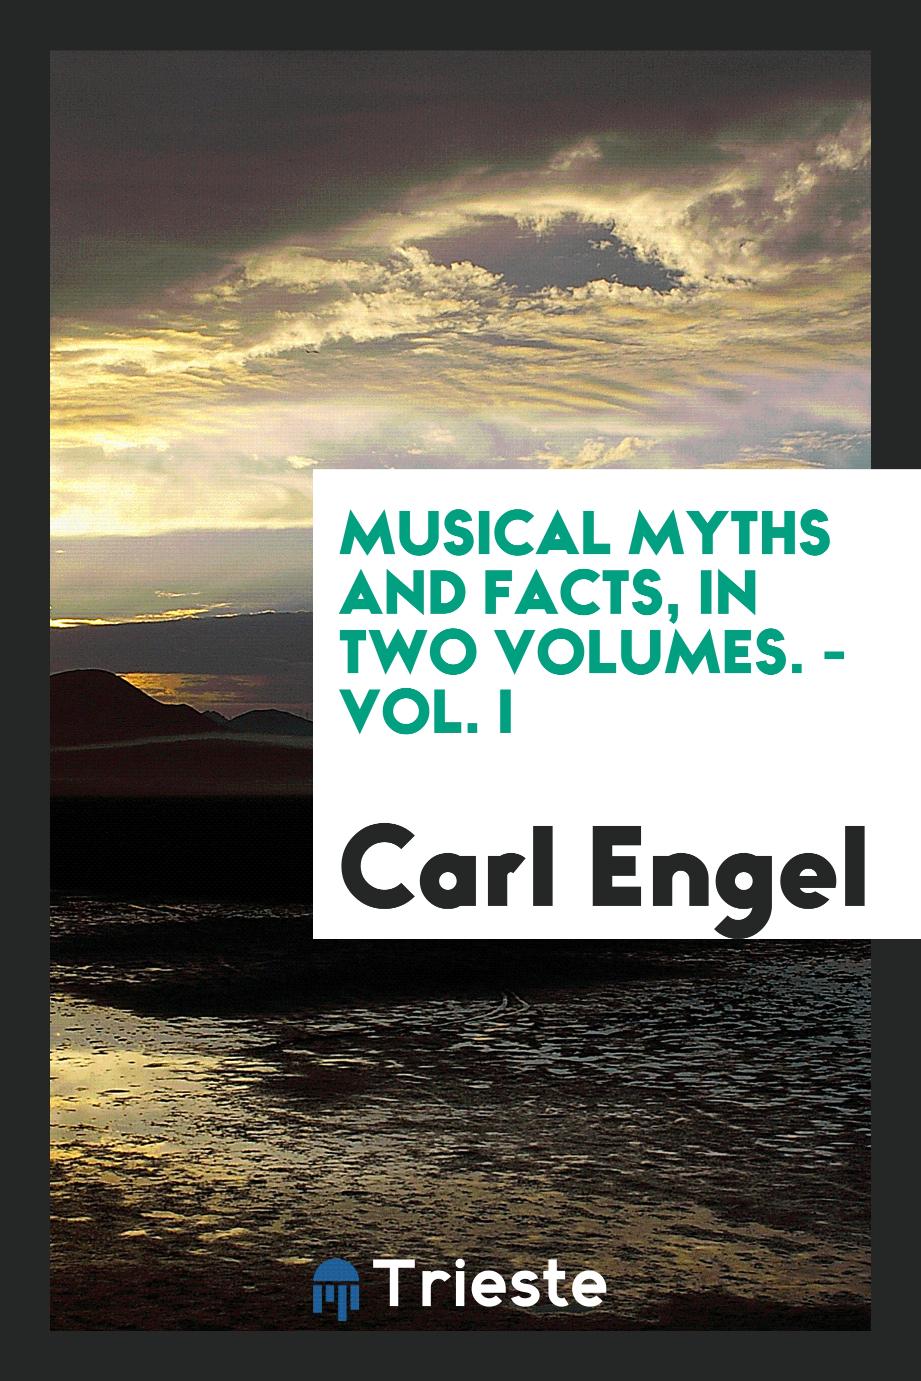 Musical myths and facts, In two volumes. - Vol. I